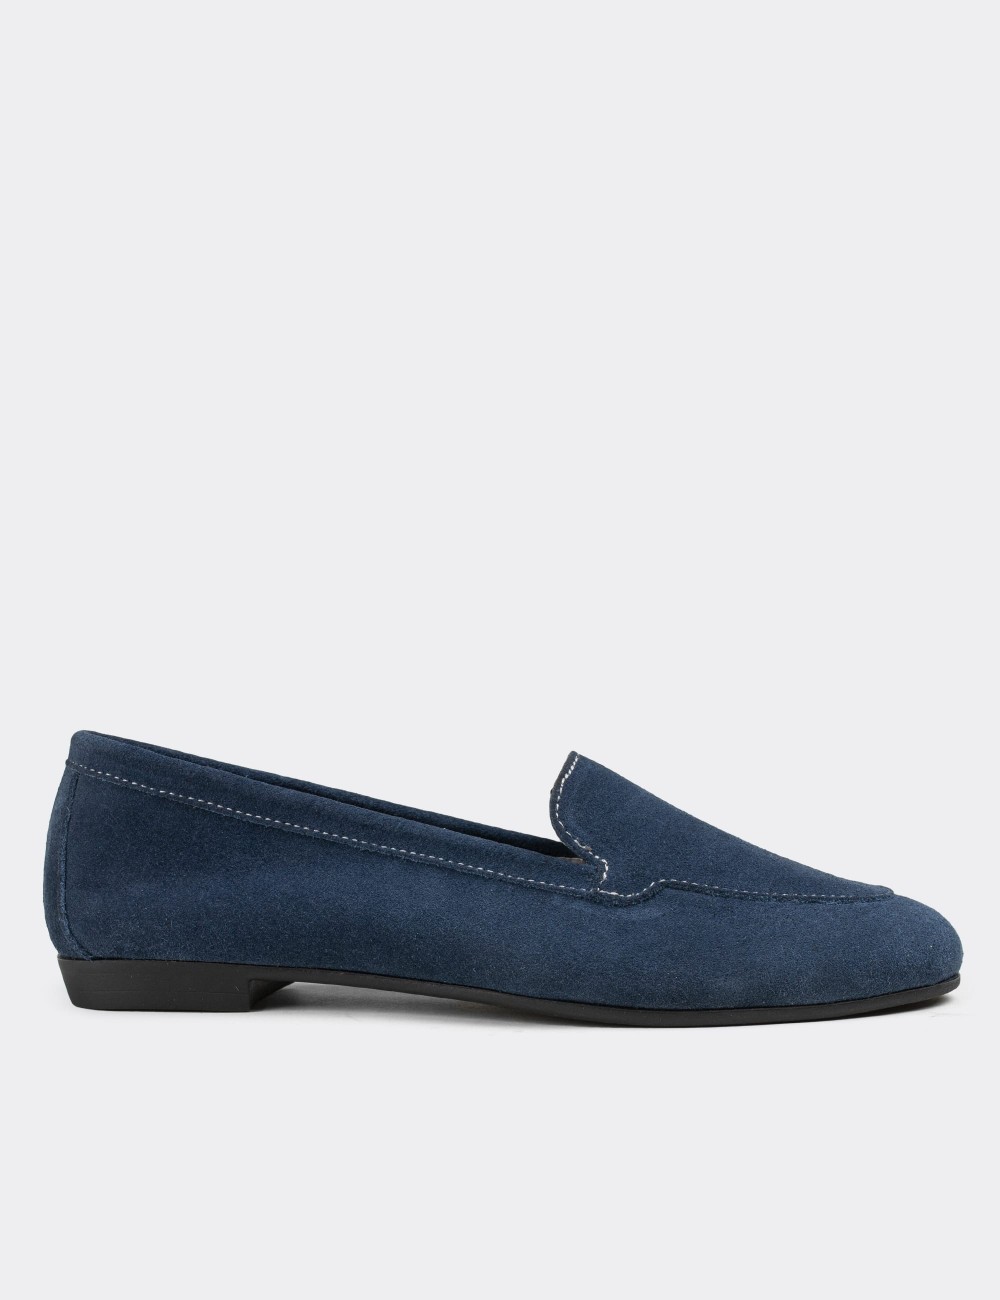 Blue Suede Leather Loafers  - E3206ZMVIC03